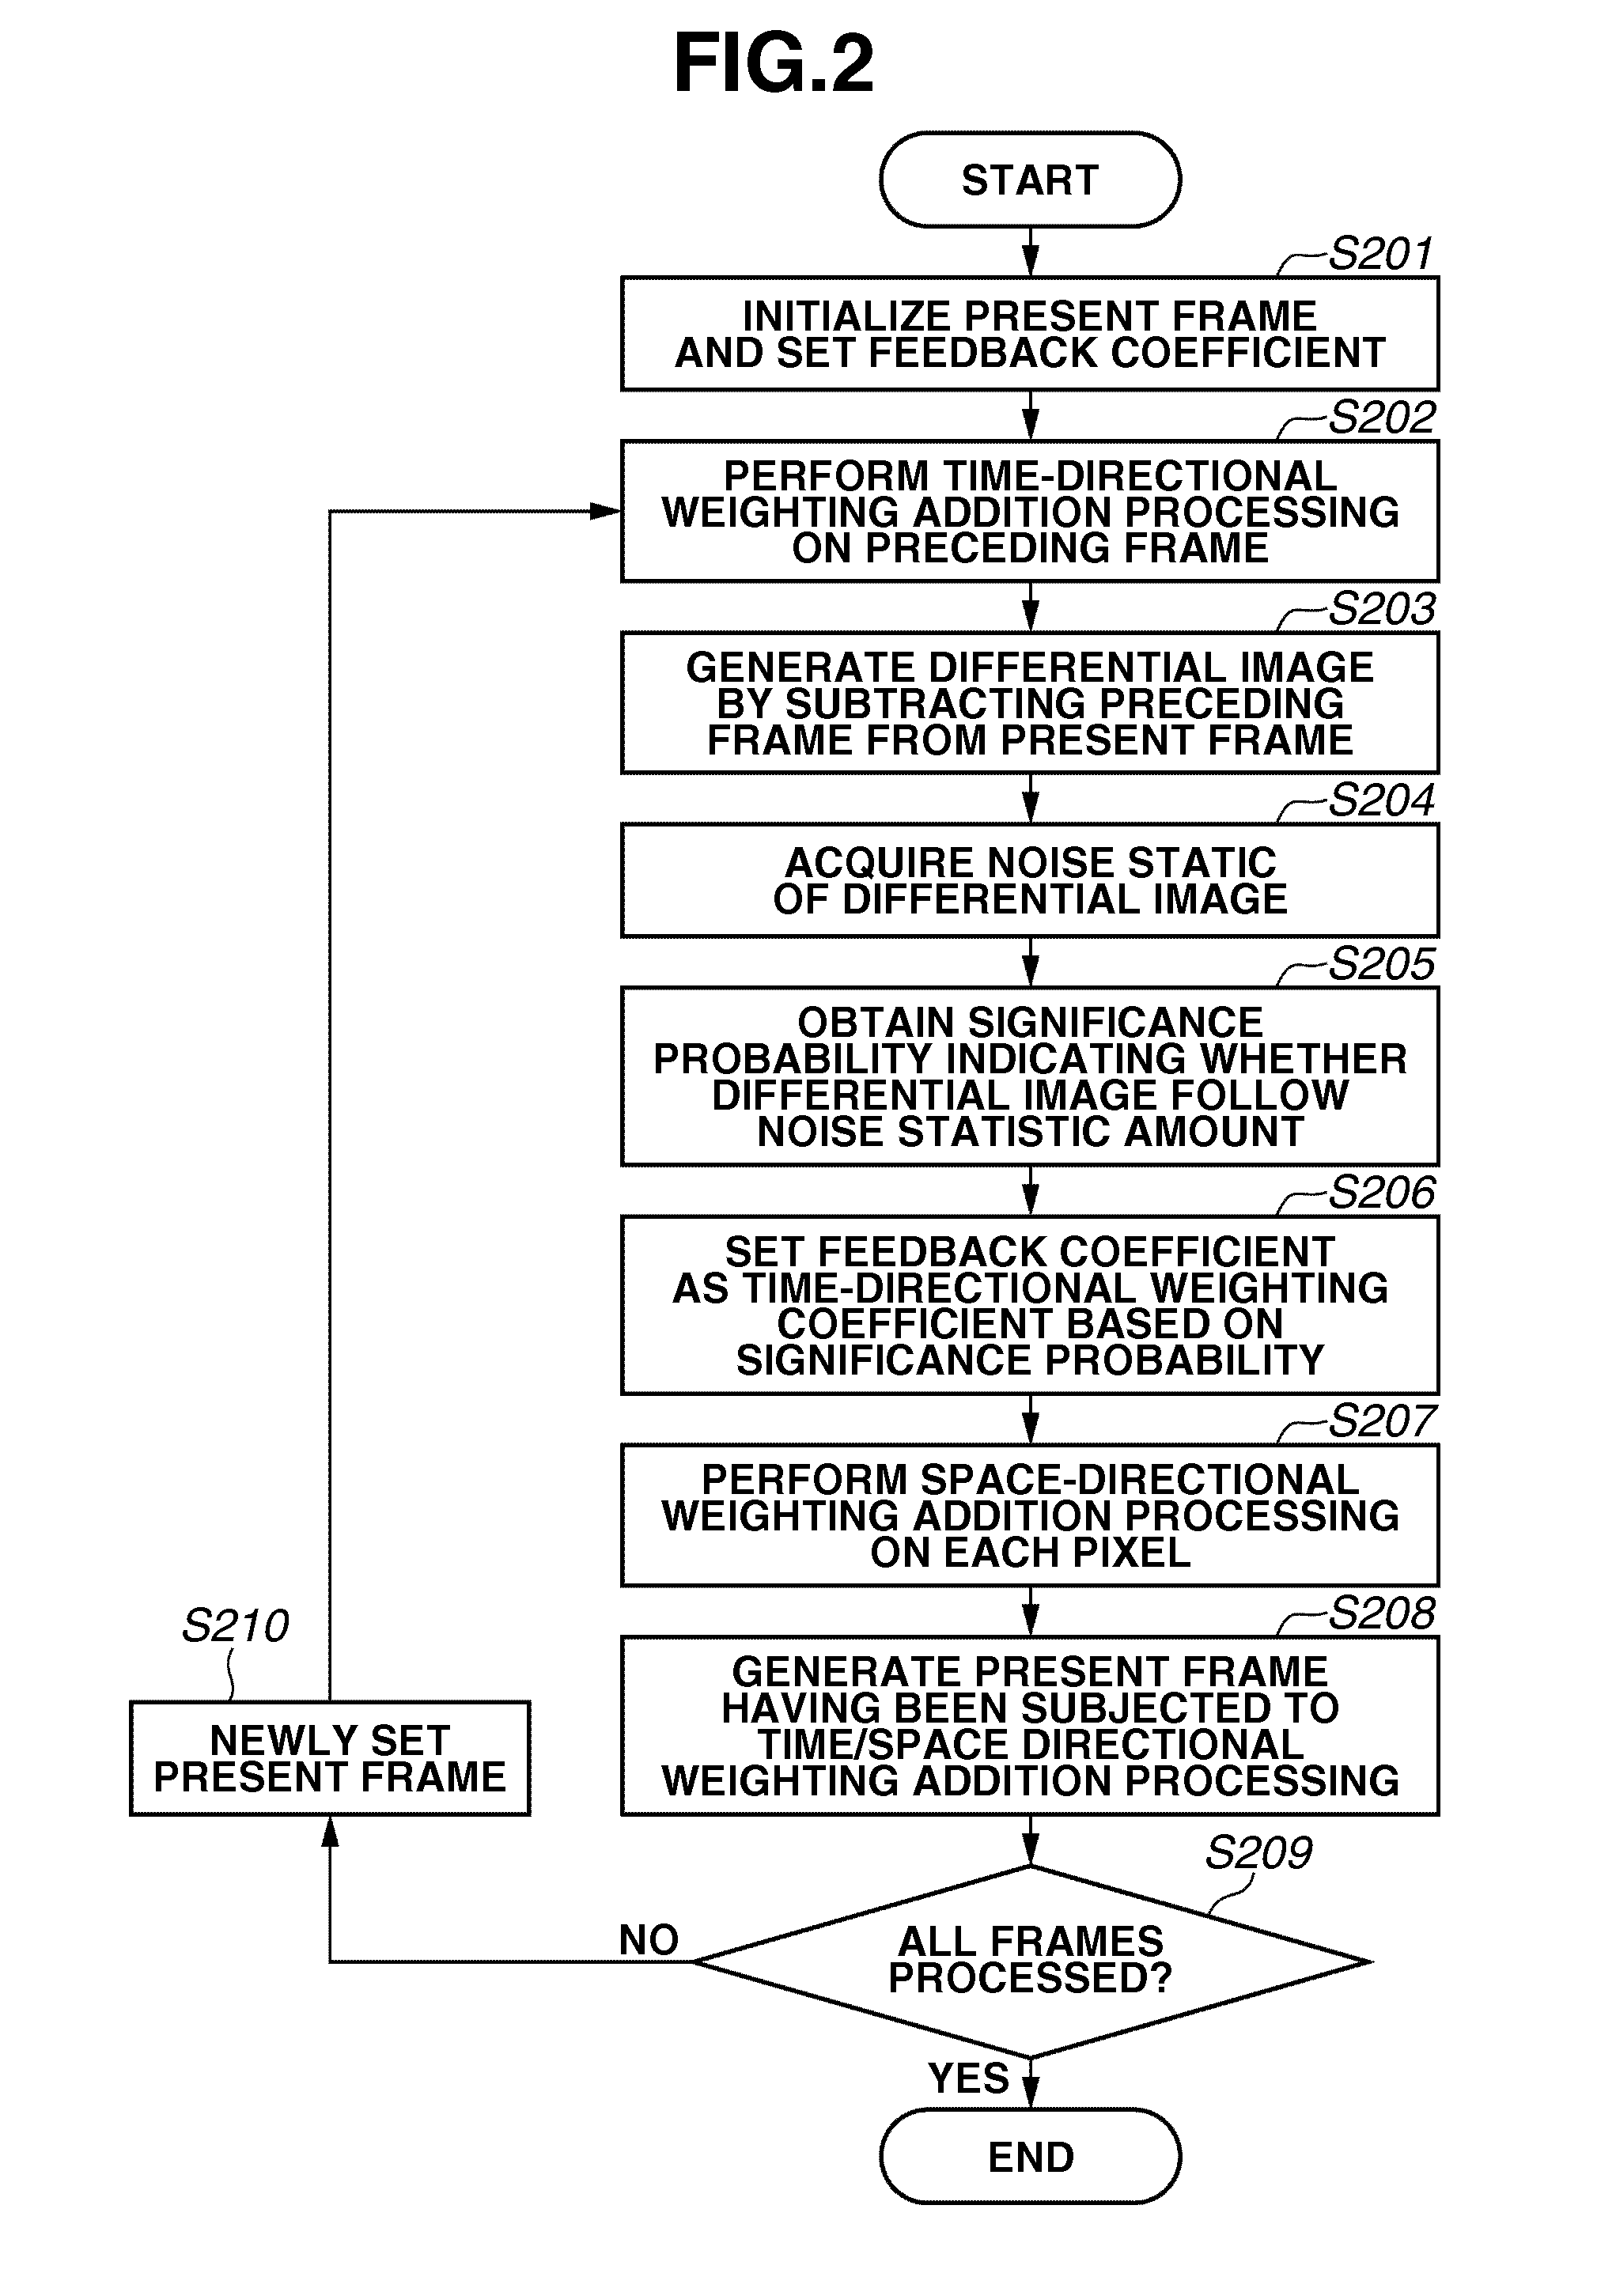 Image processing apparatus, image processing method, and computer recording medium for reducing an amount of noise included in an image